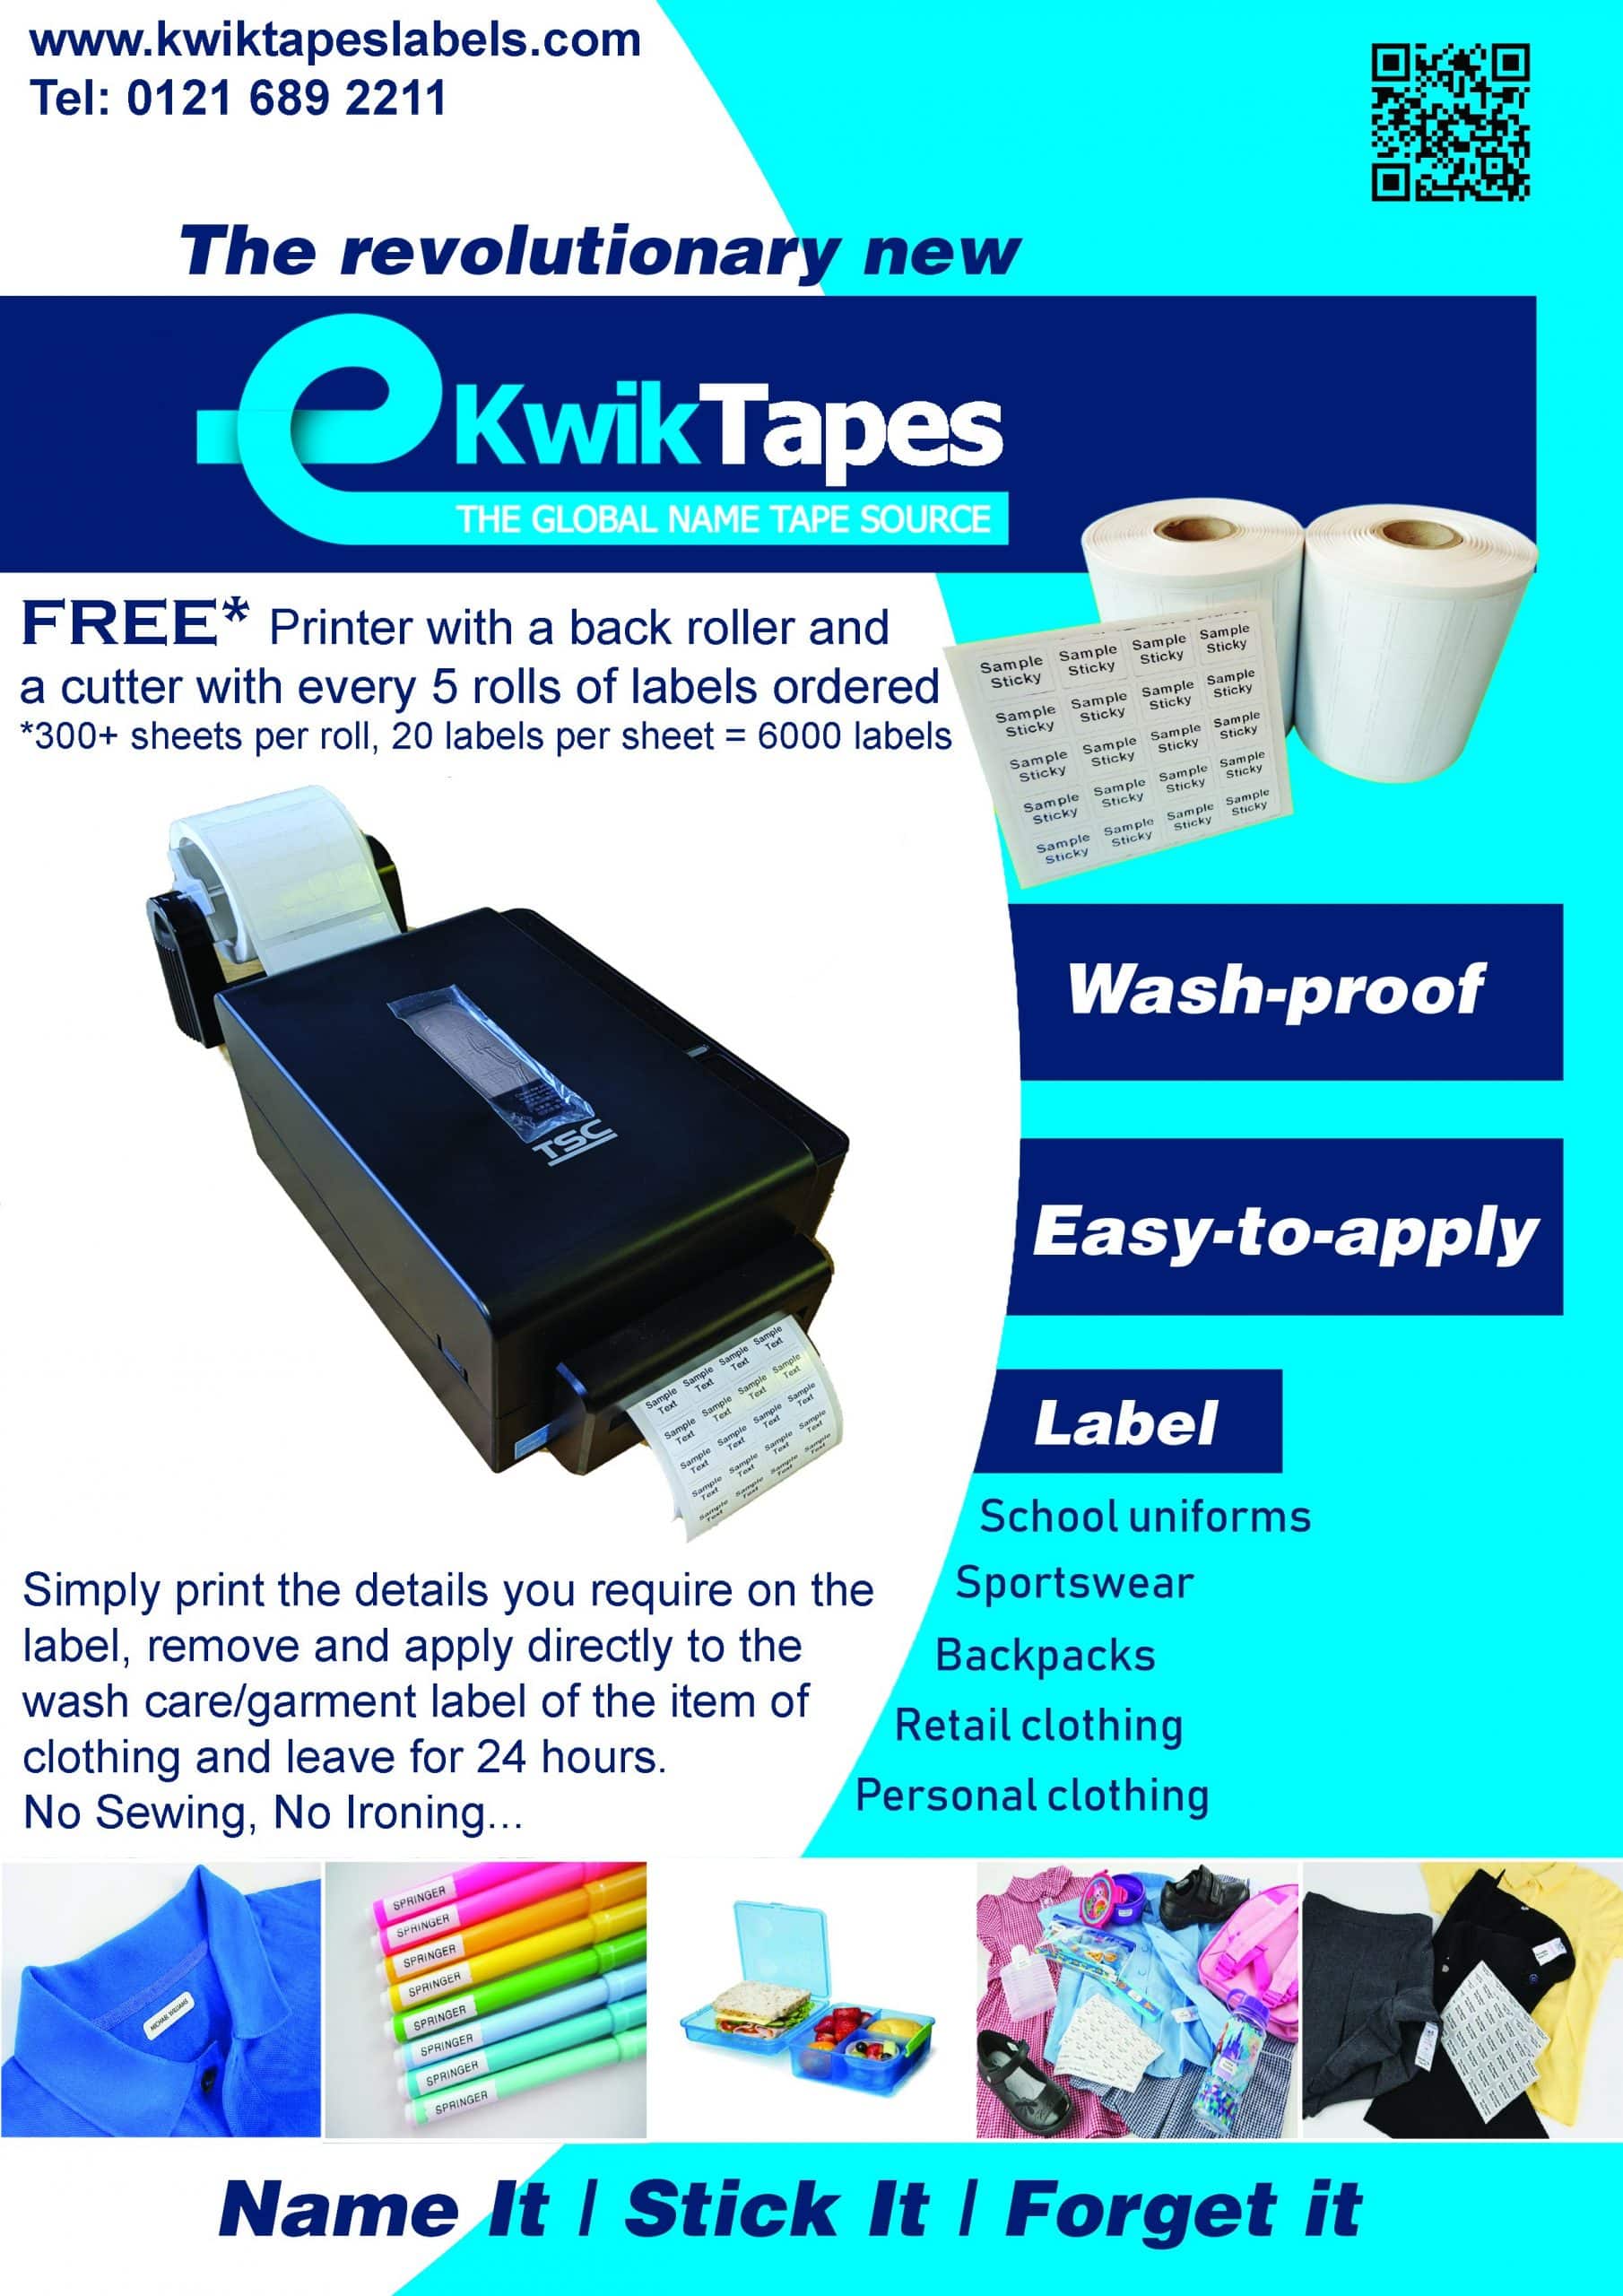 Ad-Tag Self-Adhesive Label Offer! Image